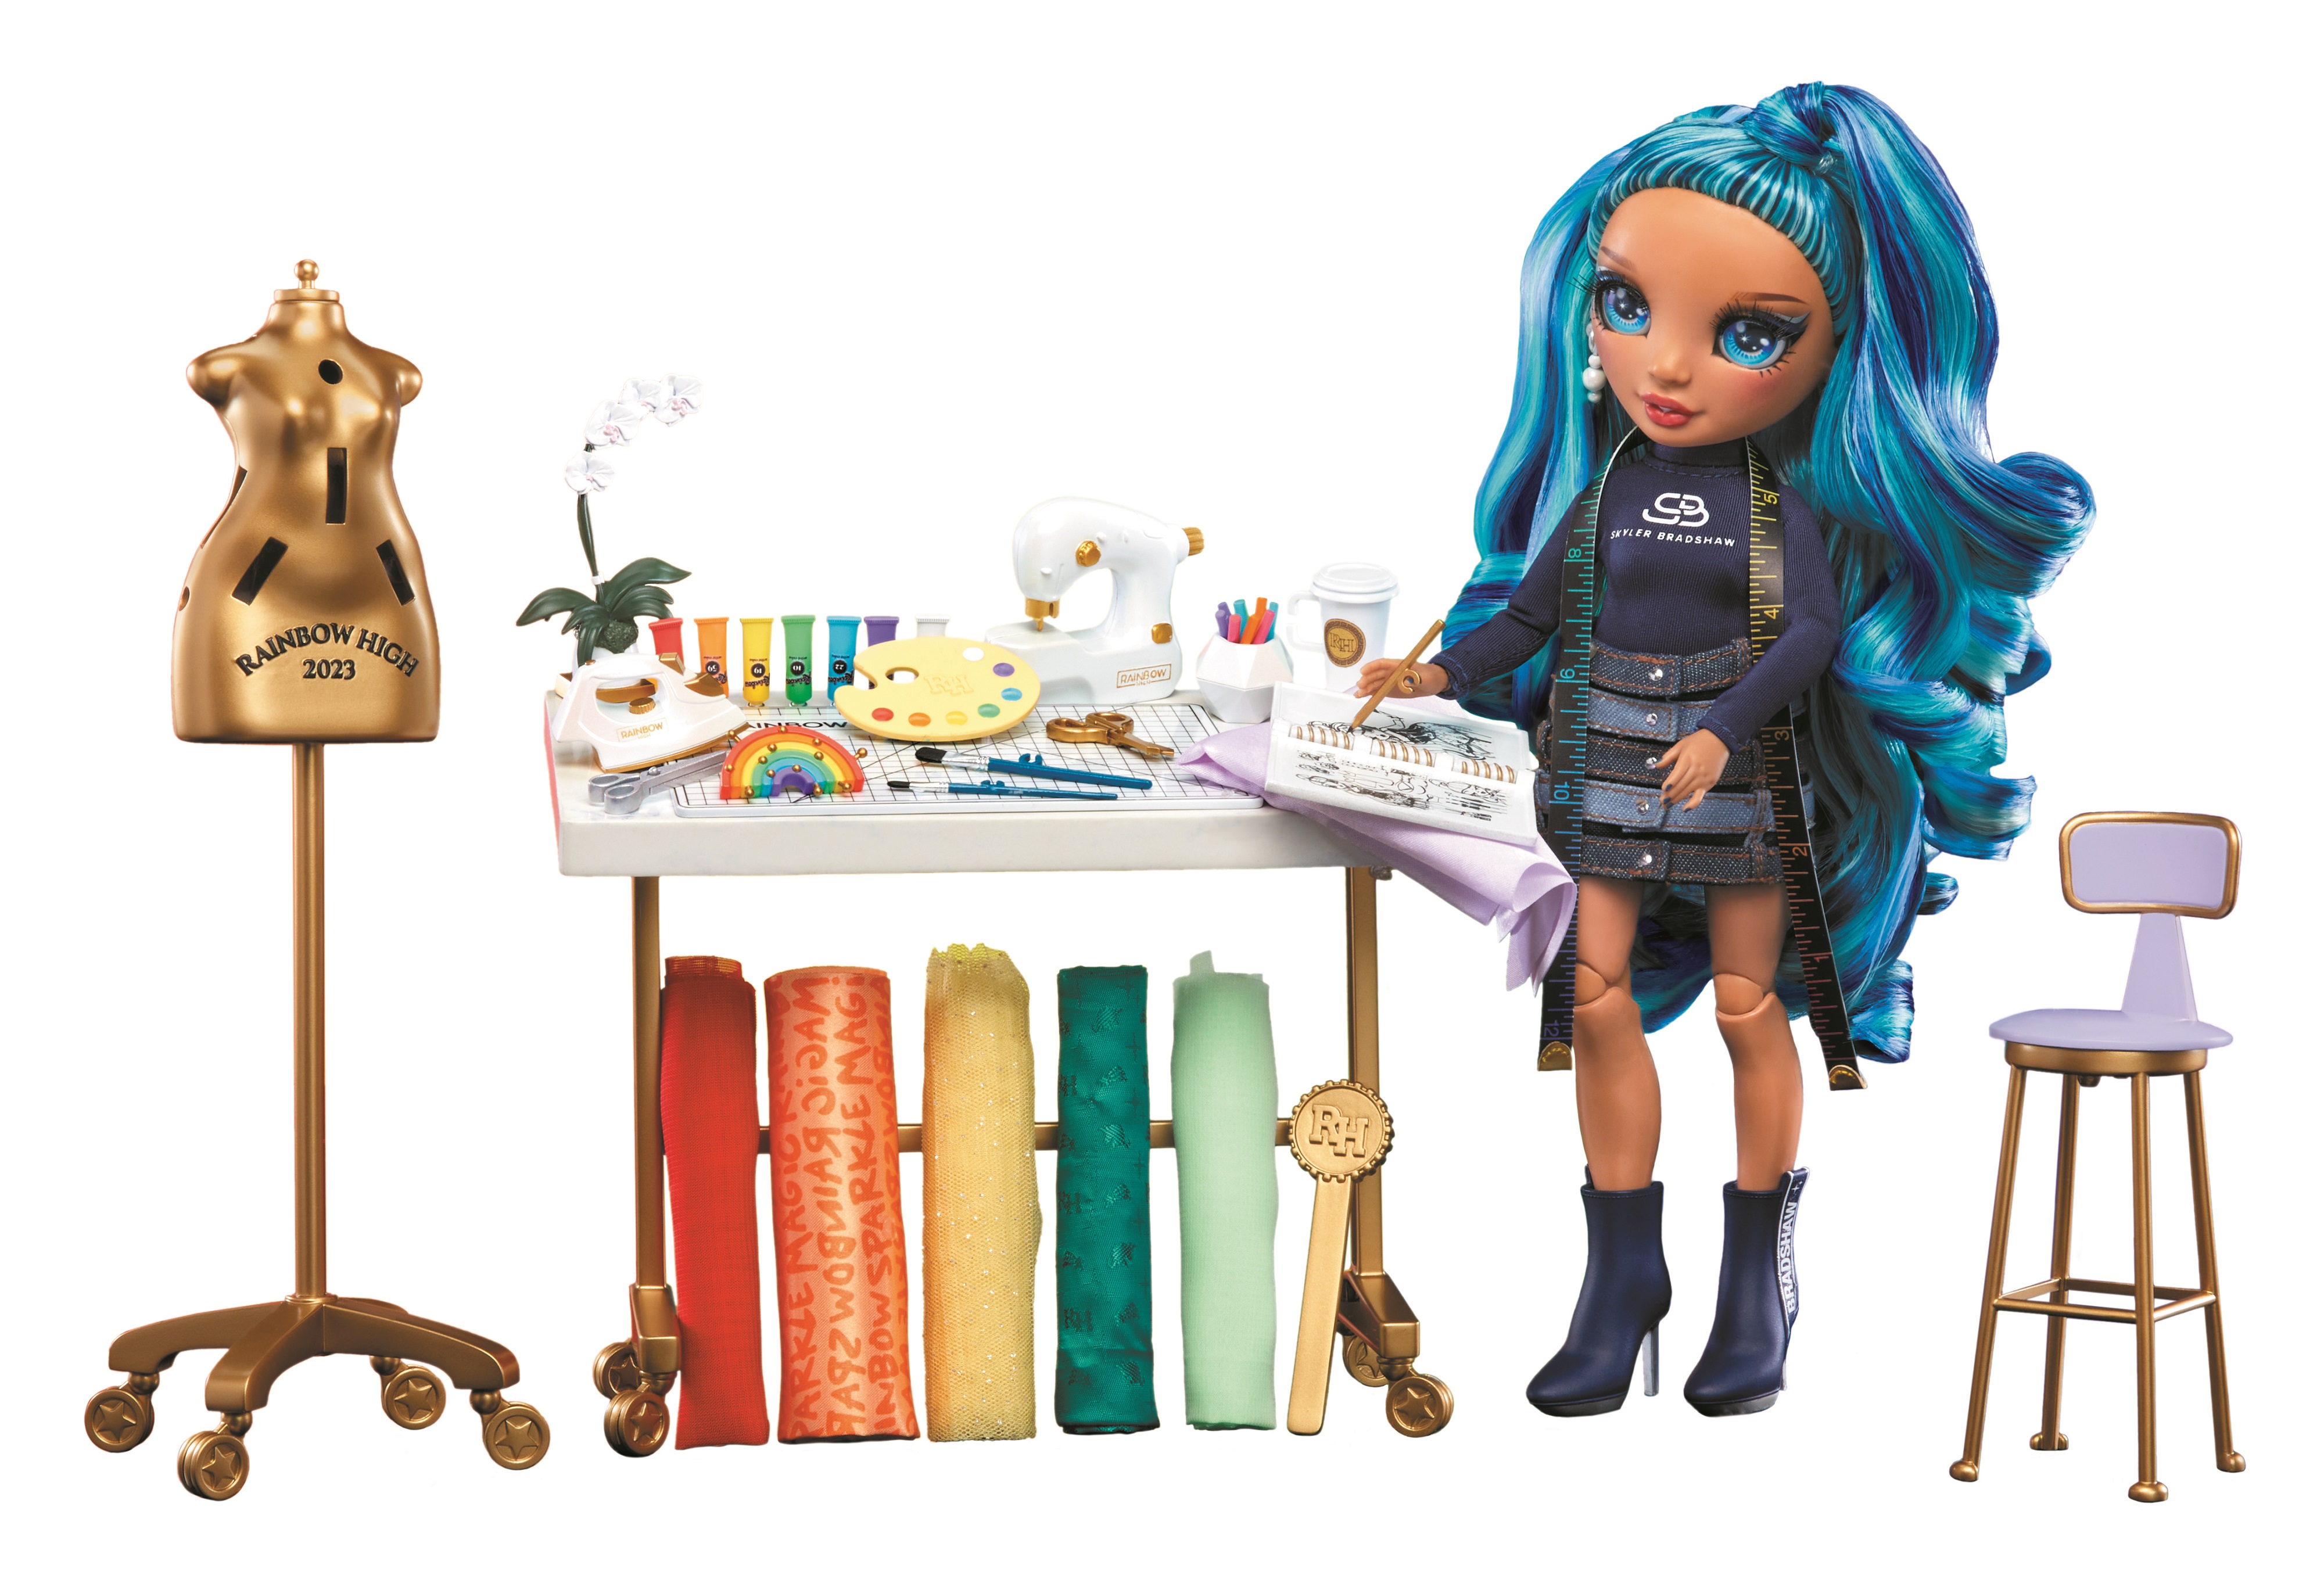 Rainbow High Dream & Design Fashion Studio, Designer Playset with Collectible Blue Skyler Doll +Easy No Sew Fashion Kit Kids Toy Gift 4-12 - image 3 of 8